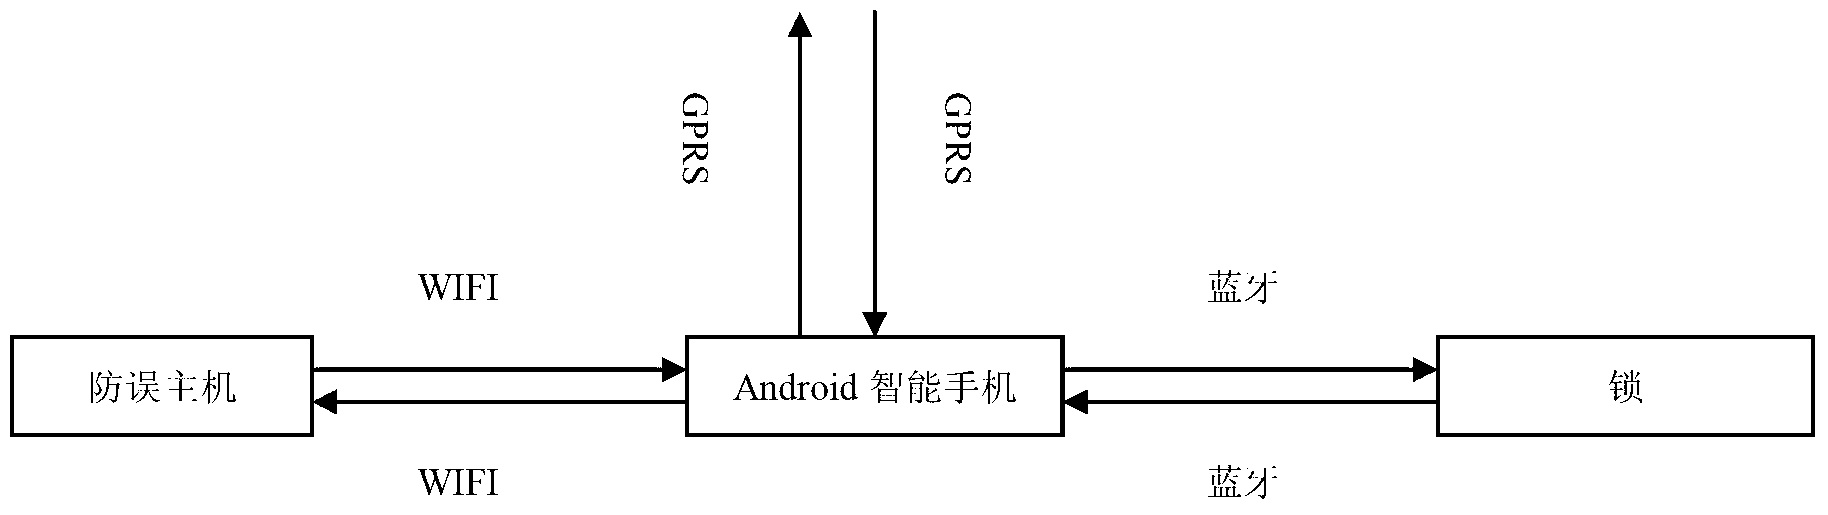 Android smart phone based GPRS (general packet radio service) network centralized control five-prevention locking system